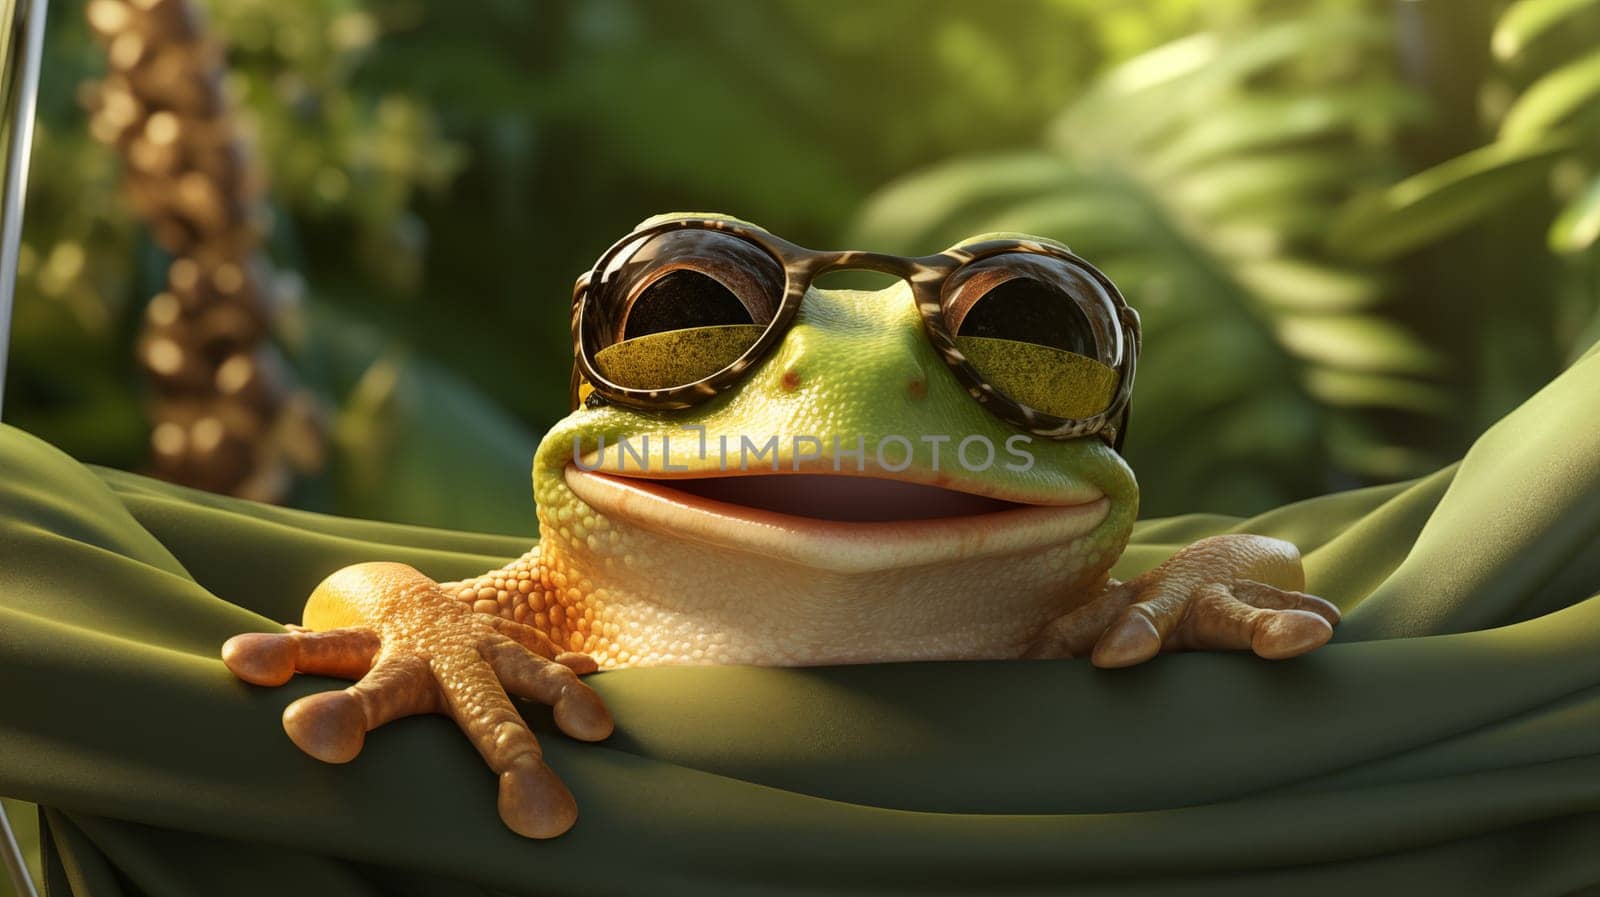 An smiling frog wearing sunglasses, casually lounging on an green hammock with a tropical backdrop by Zakharova